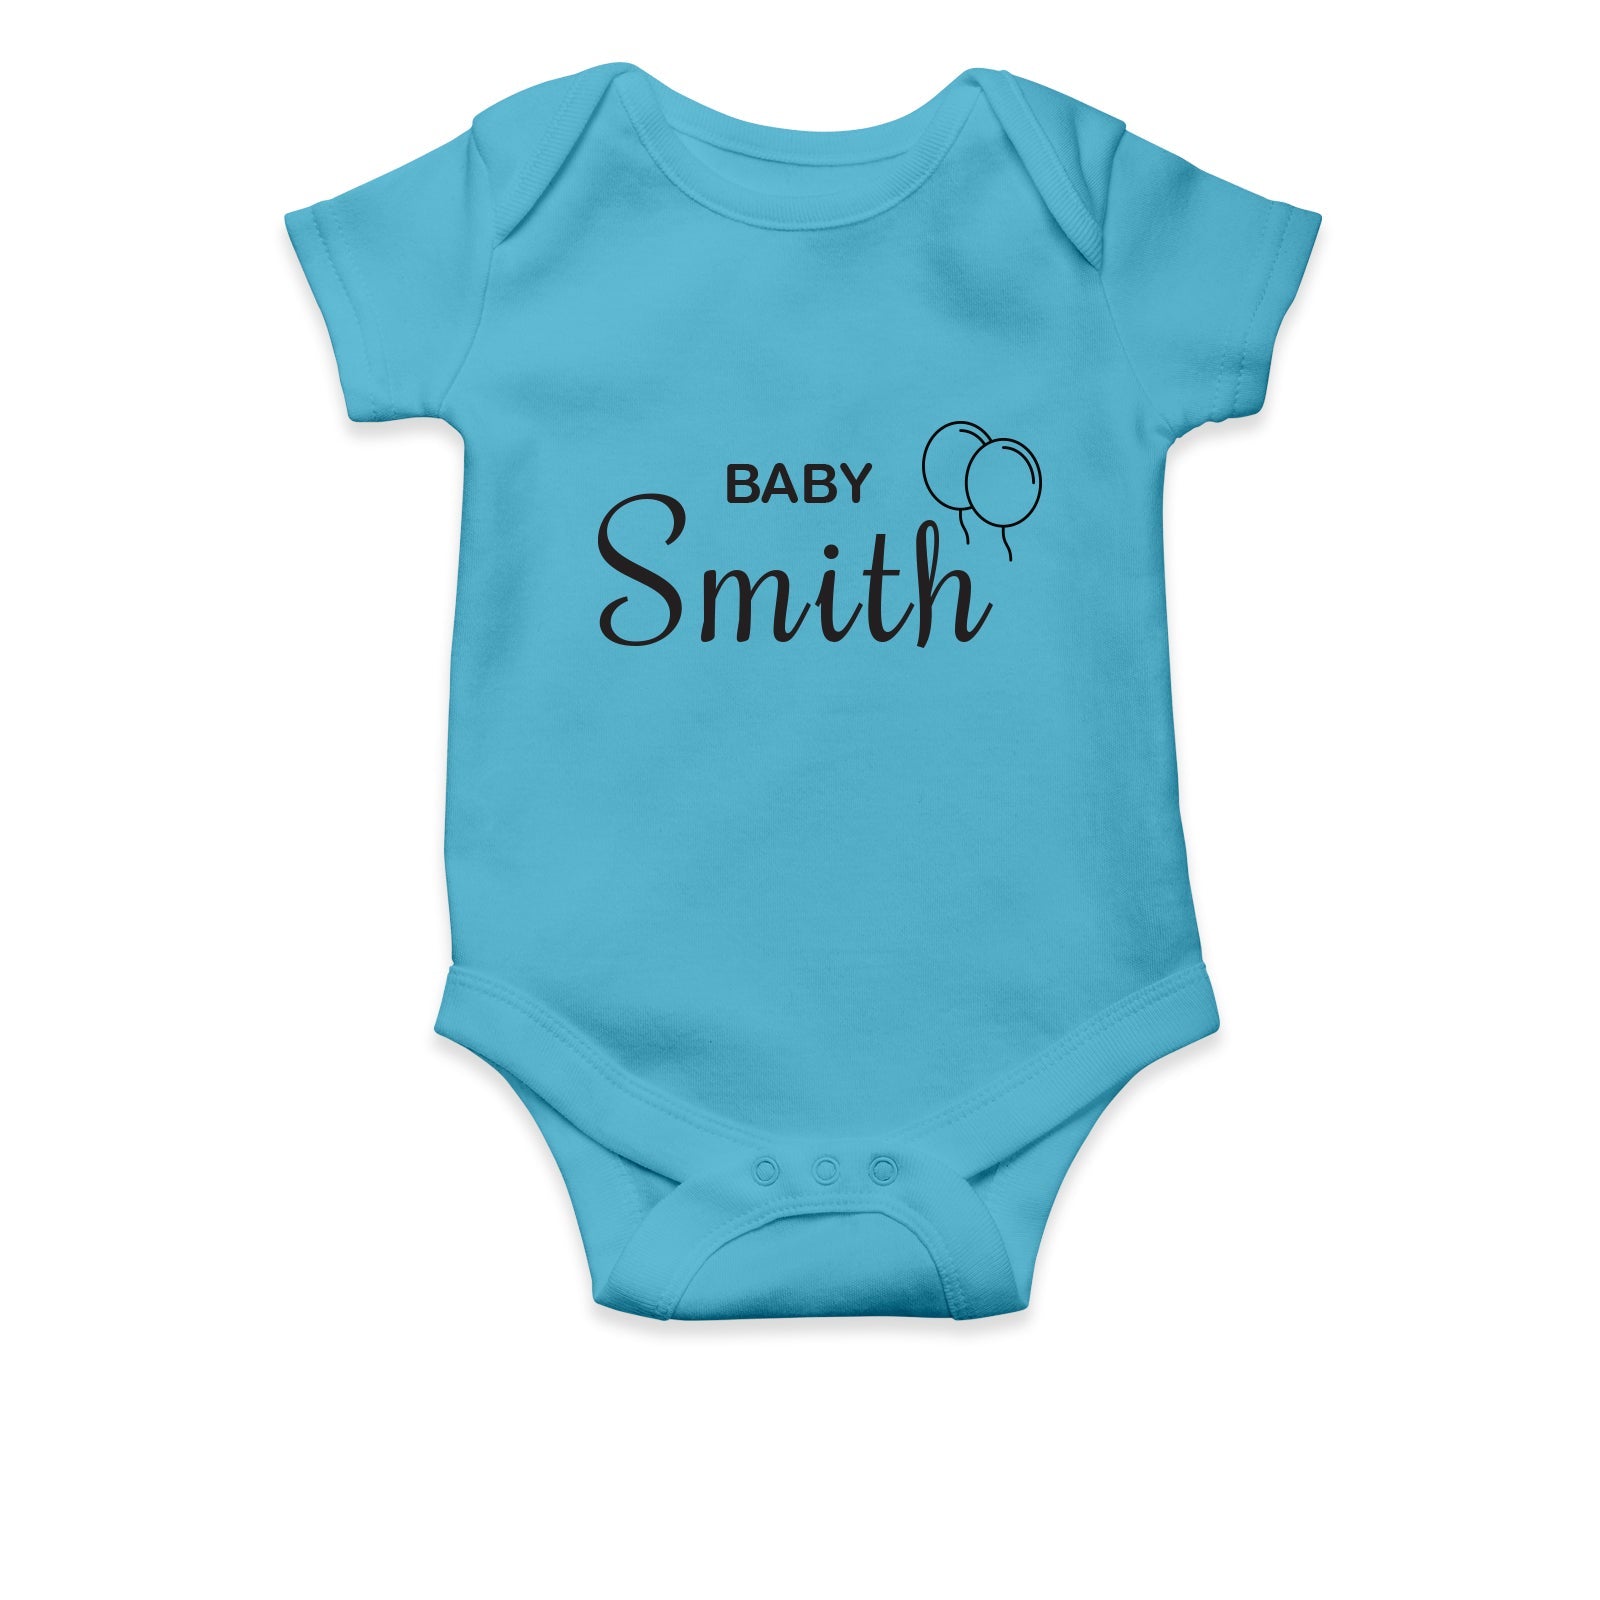 Personalised White Baby Body Suit Grow Vest - Two Balloons